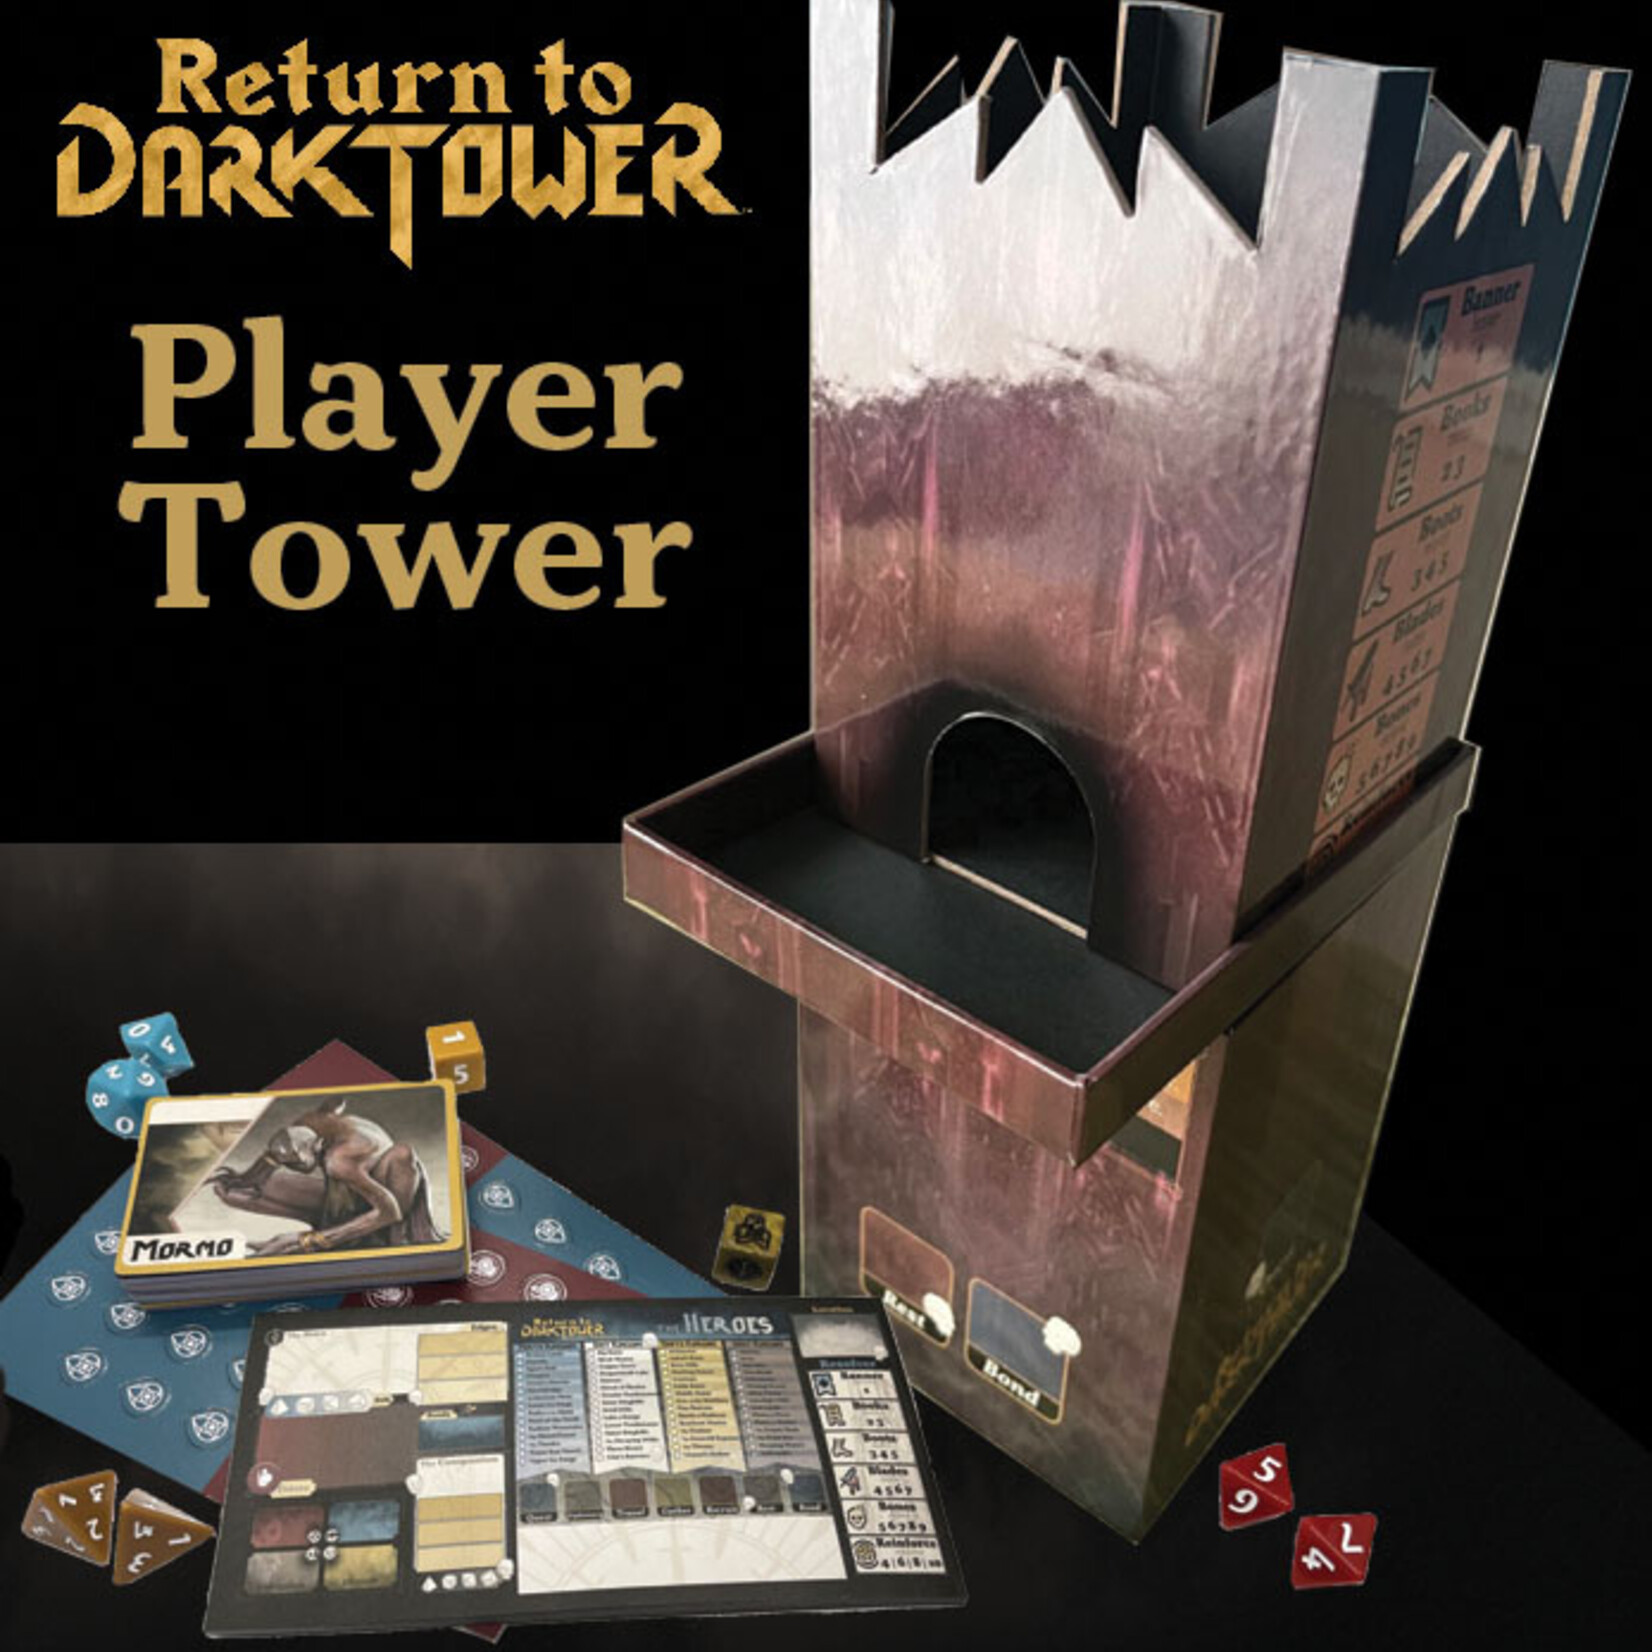 9th Level Games Return to Dark Tower Fantasy RPG: Player Tower Accessory Set